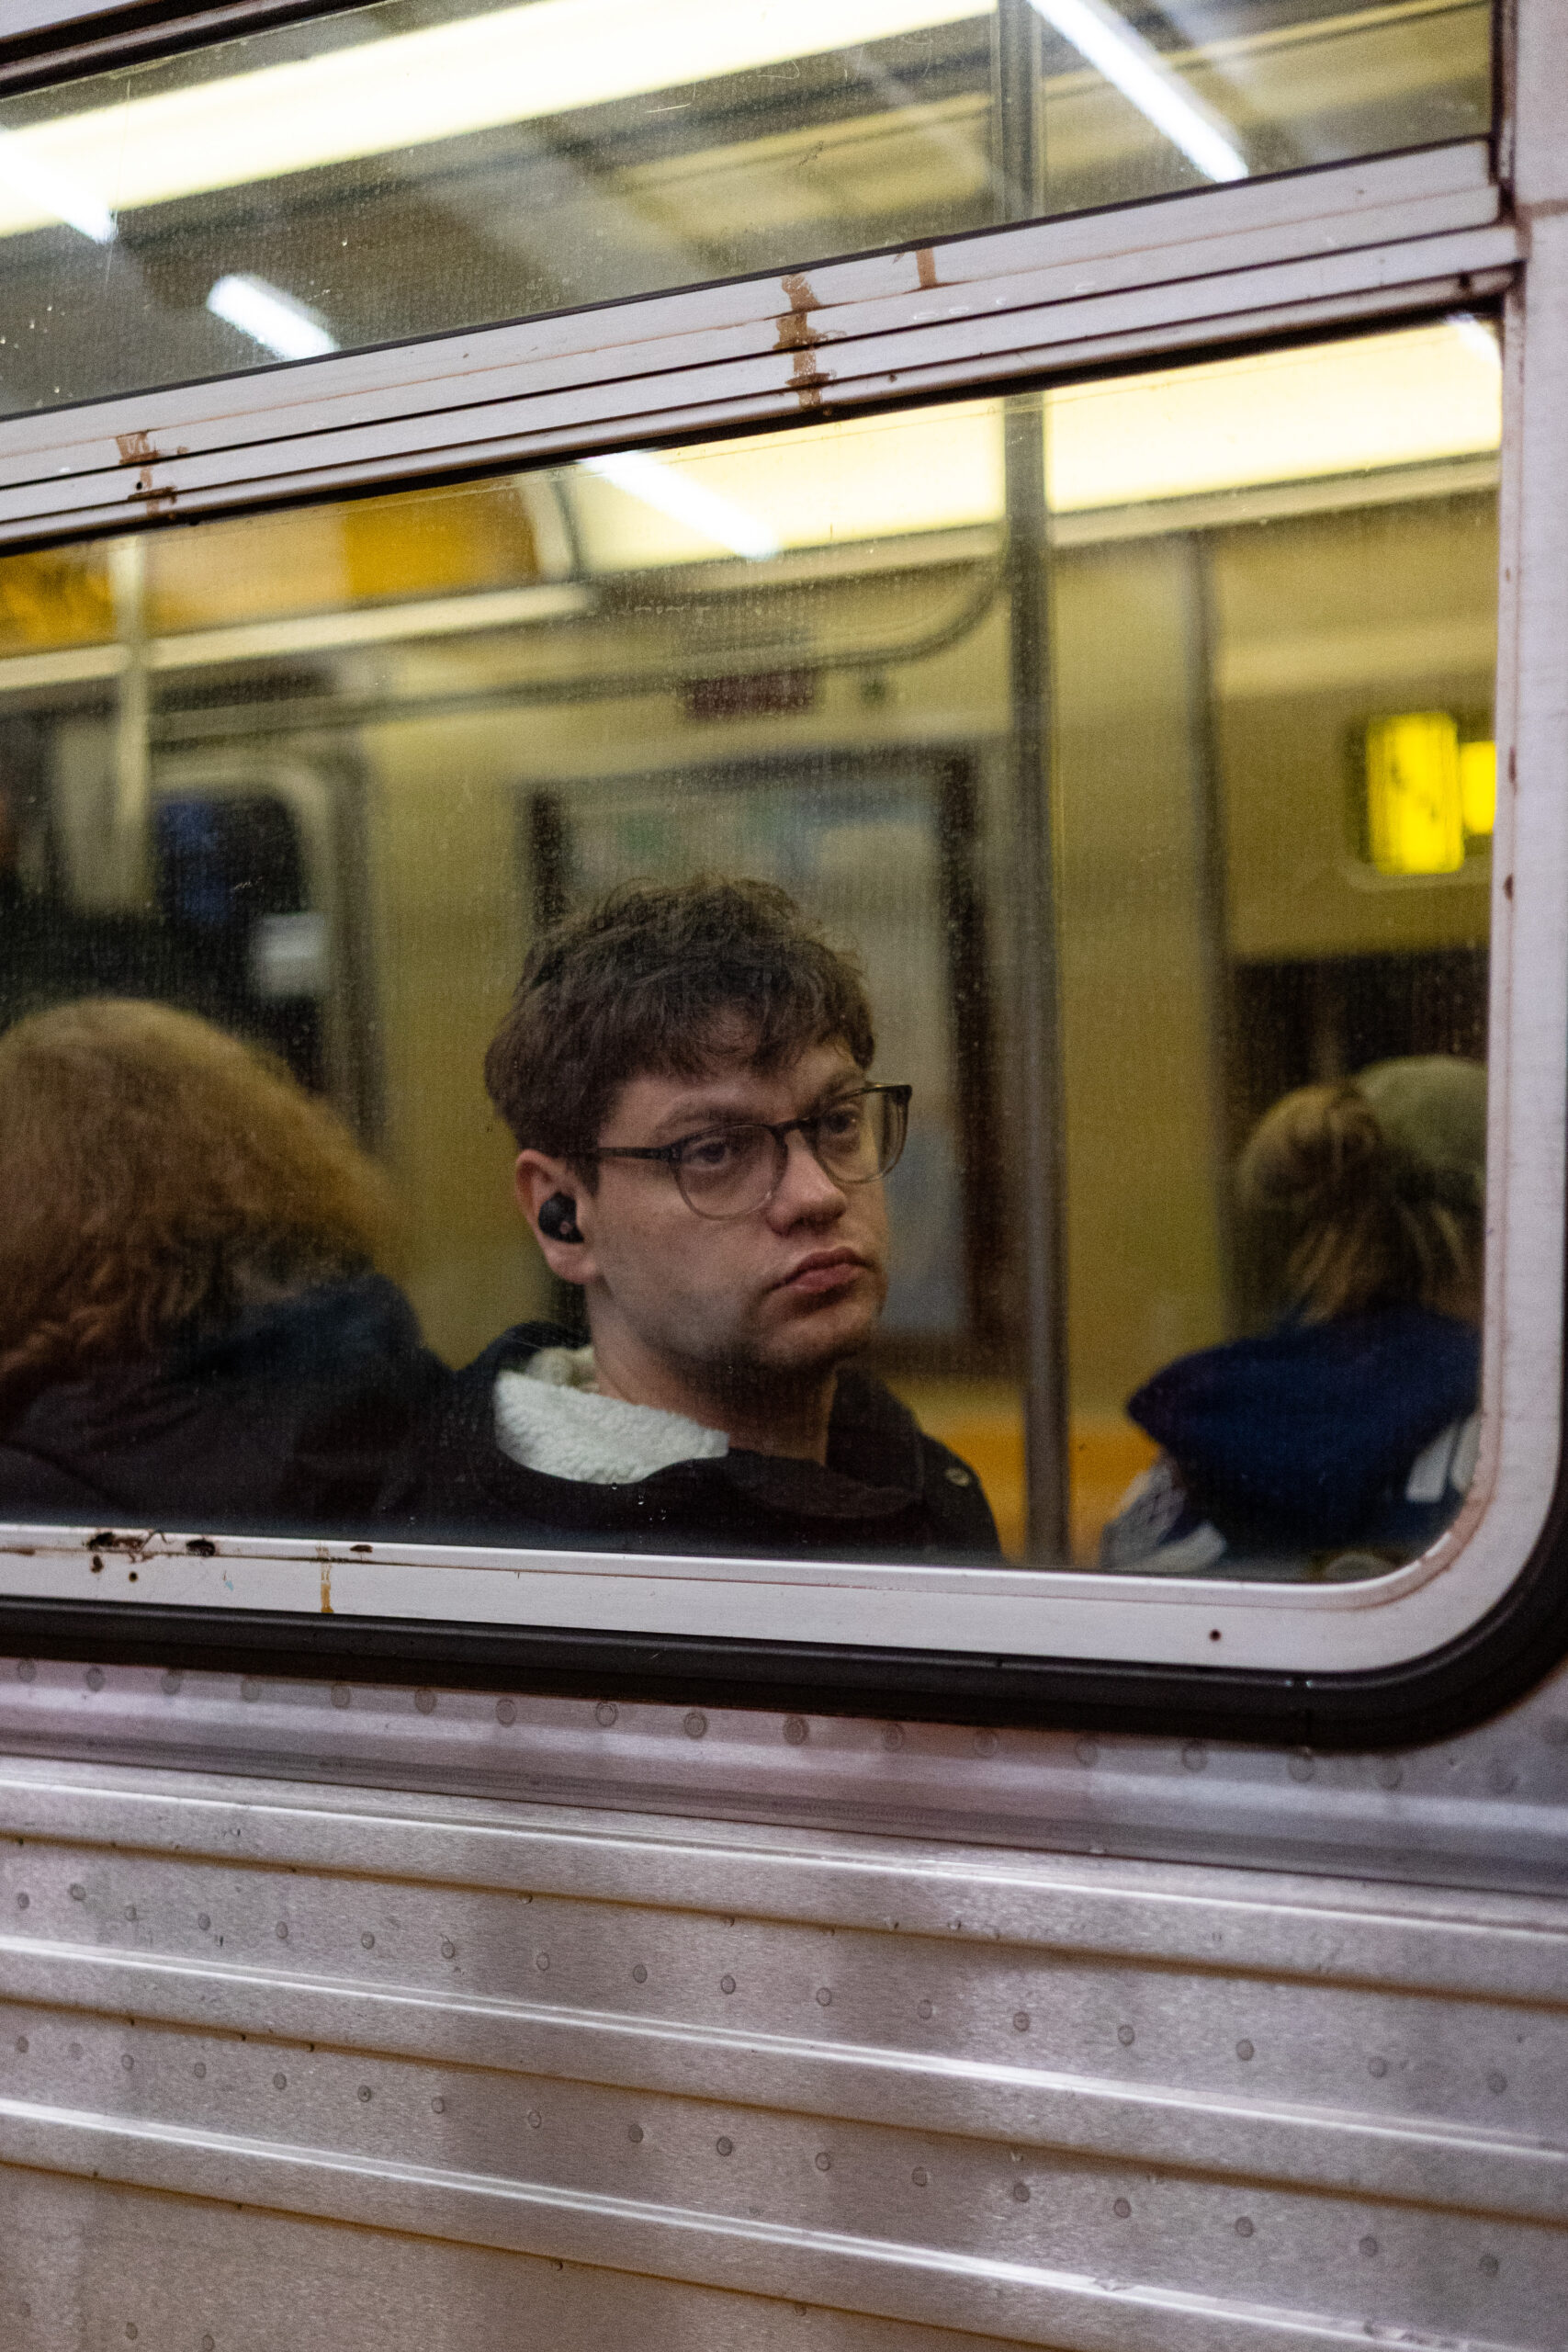 A man looks out the subway window seemingly at nothing. His face and eyes are expressionless. Two woman sit on either side of him, their back towards the camera. Skid marks can be seen on the dirty window and there are stripes of light reflection from the luminescent lights above. He is framed by the cool silver of the subway car which contrasts with the warm interior.